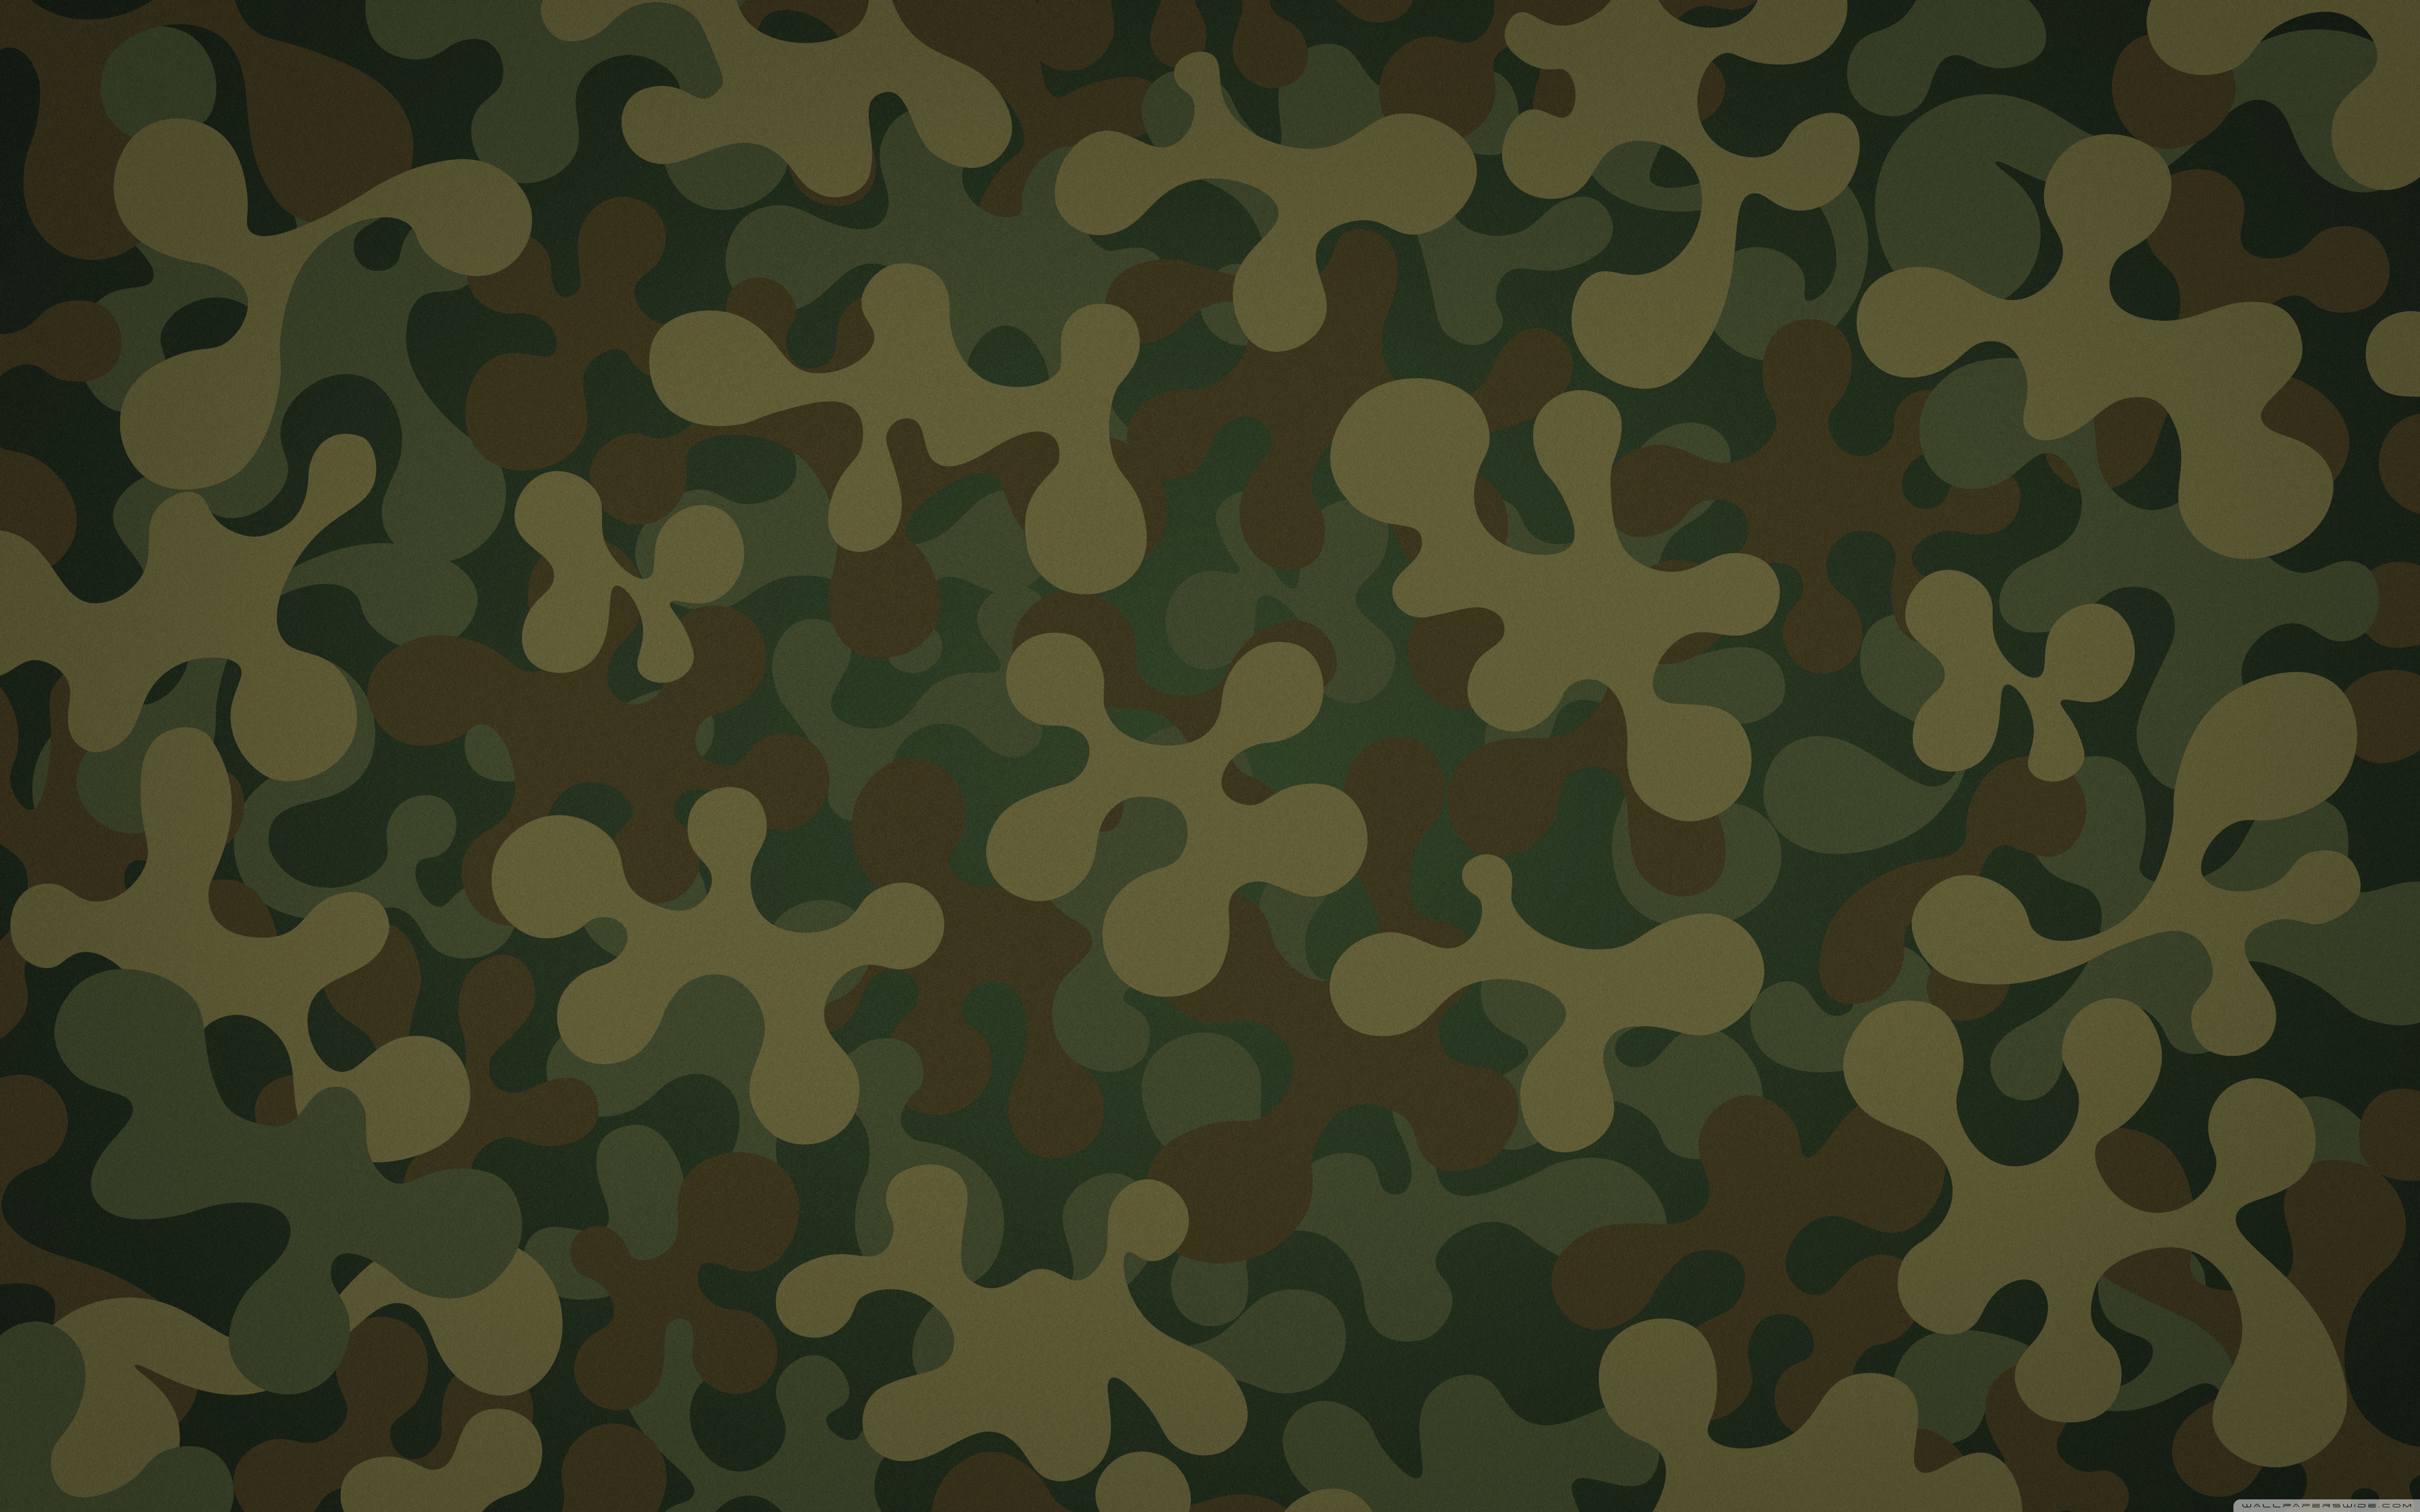 Grey military camouflage background Royalty Free Vector